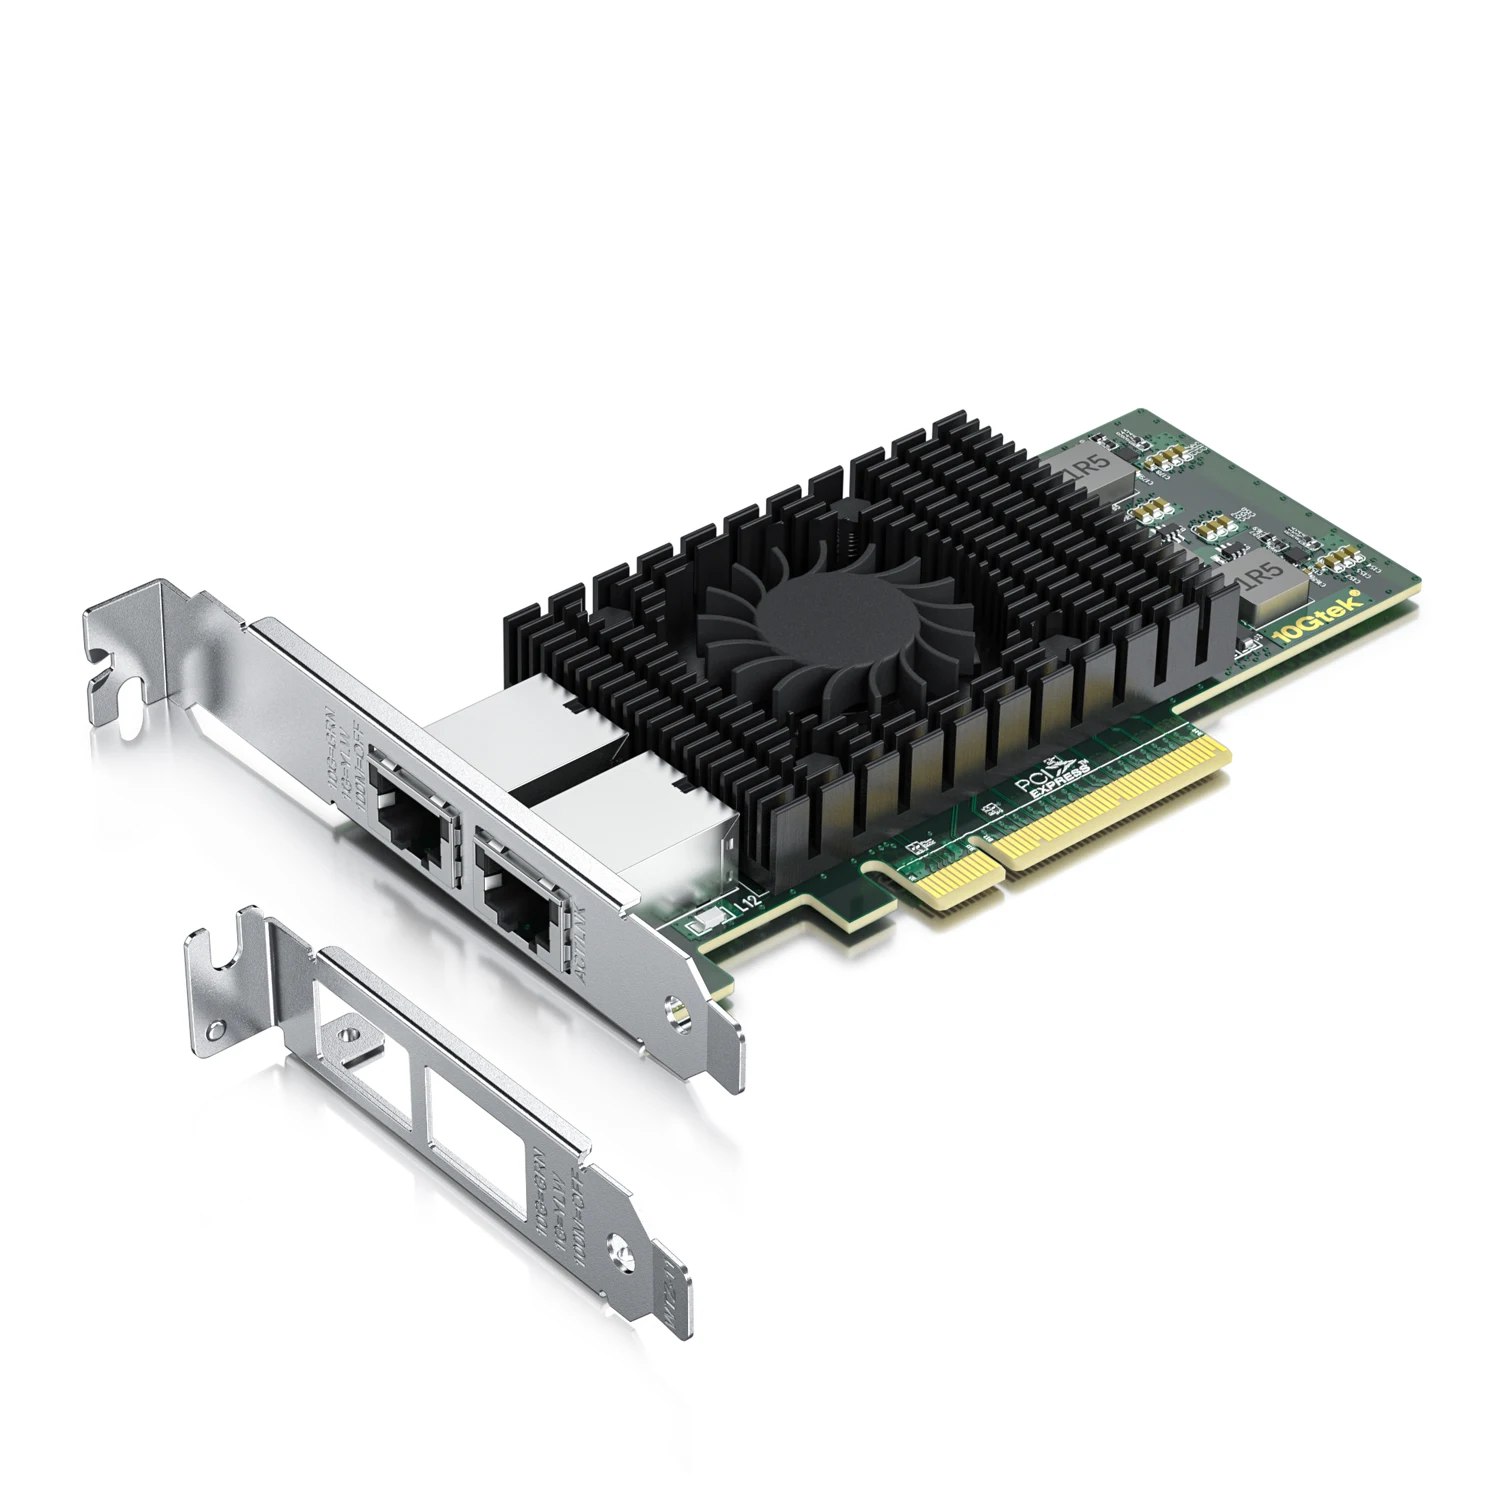 10Gb PCI-E NIC Network Card, PCI Express Ethernet LAN Adapter Support Windows Server/Windows/Linux/ESX, Compare to Intel X540-T2 10gb pci e nic network card dual sfp port pci express ethernet lan adapter support windows server compare to intel x520 da2